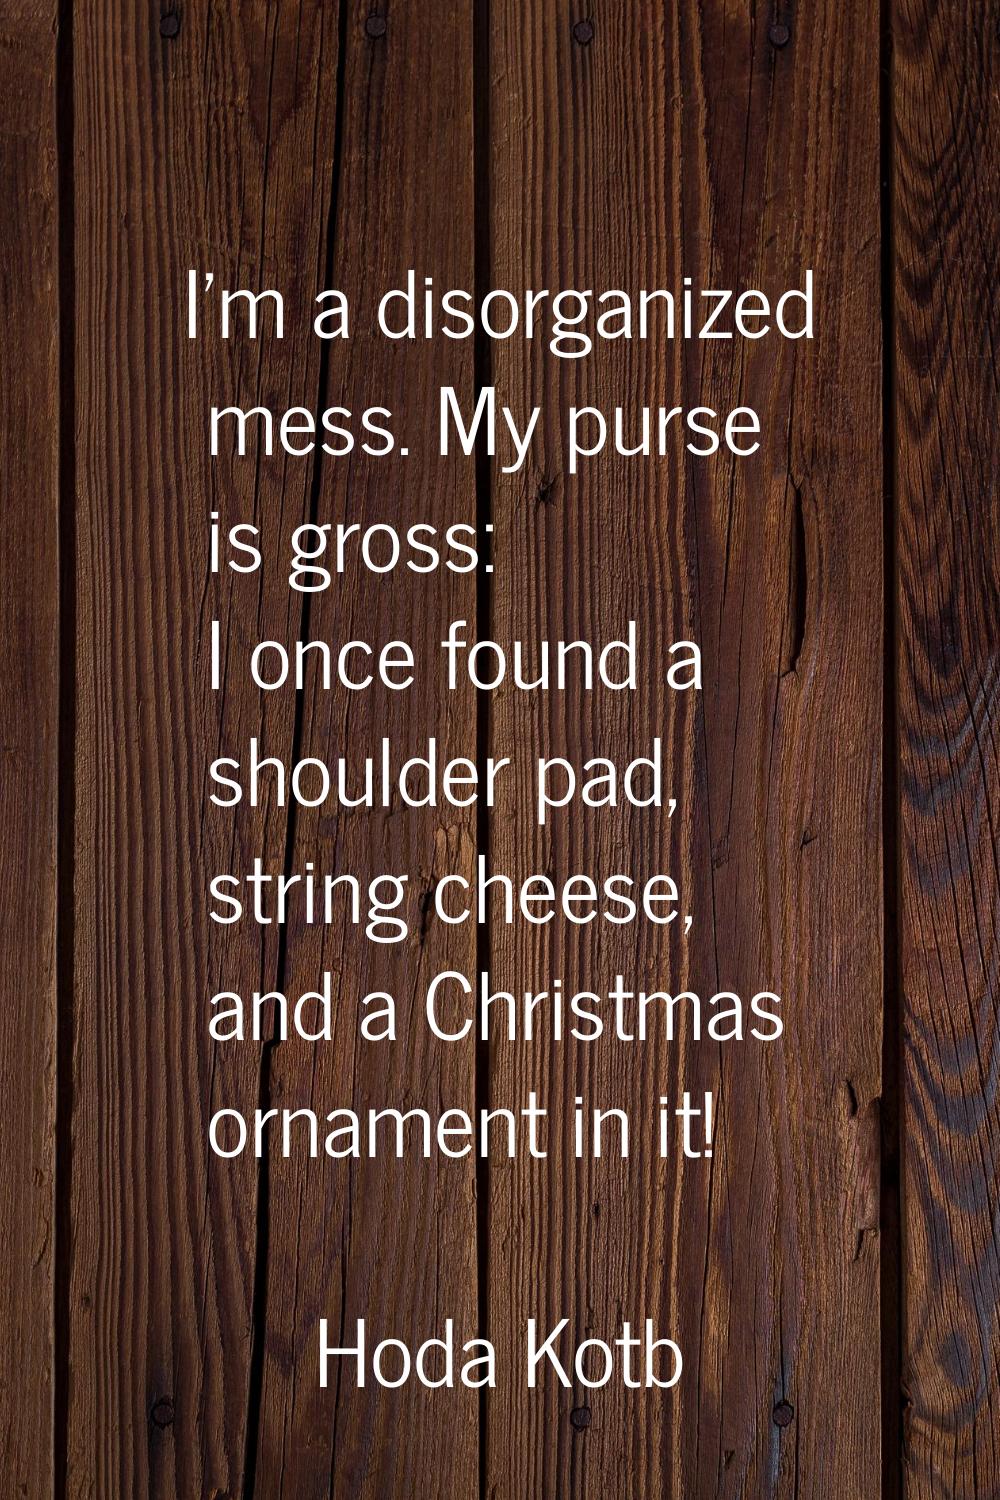 I'm a disorganized mess. My purse is gross: I once found a shoulder pad, string cheese, and a Chris